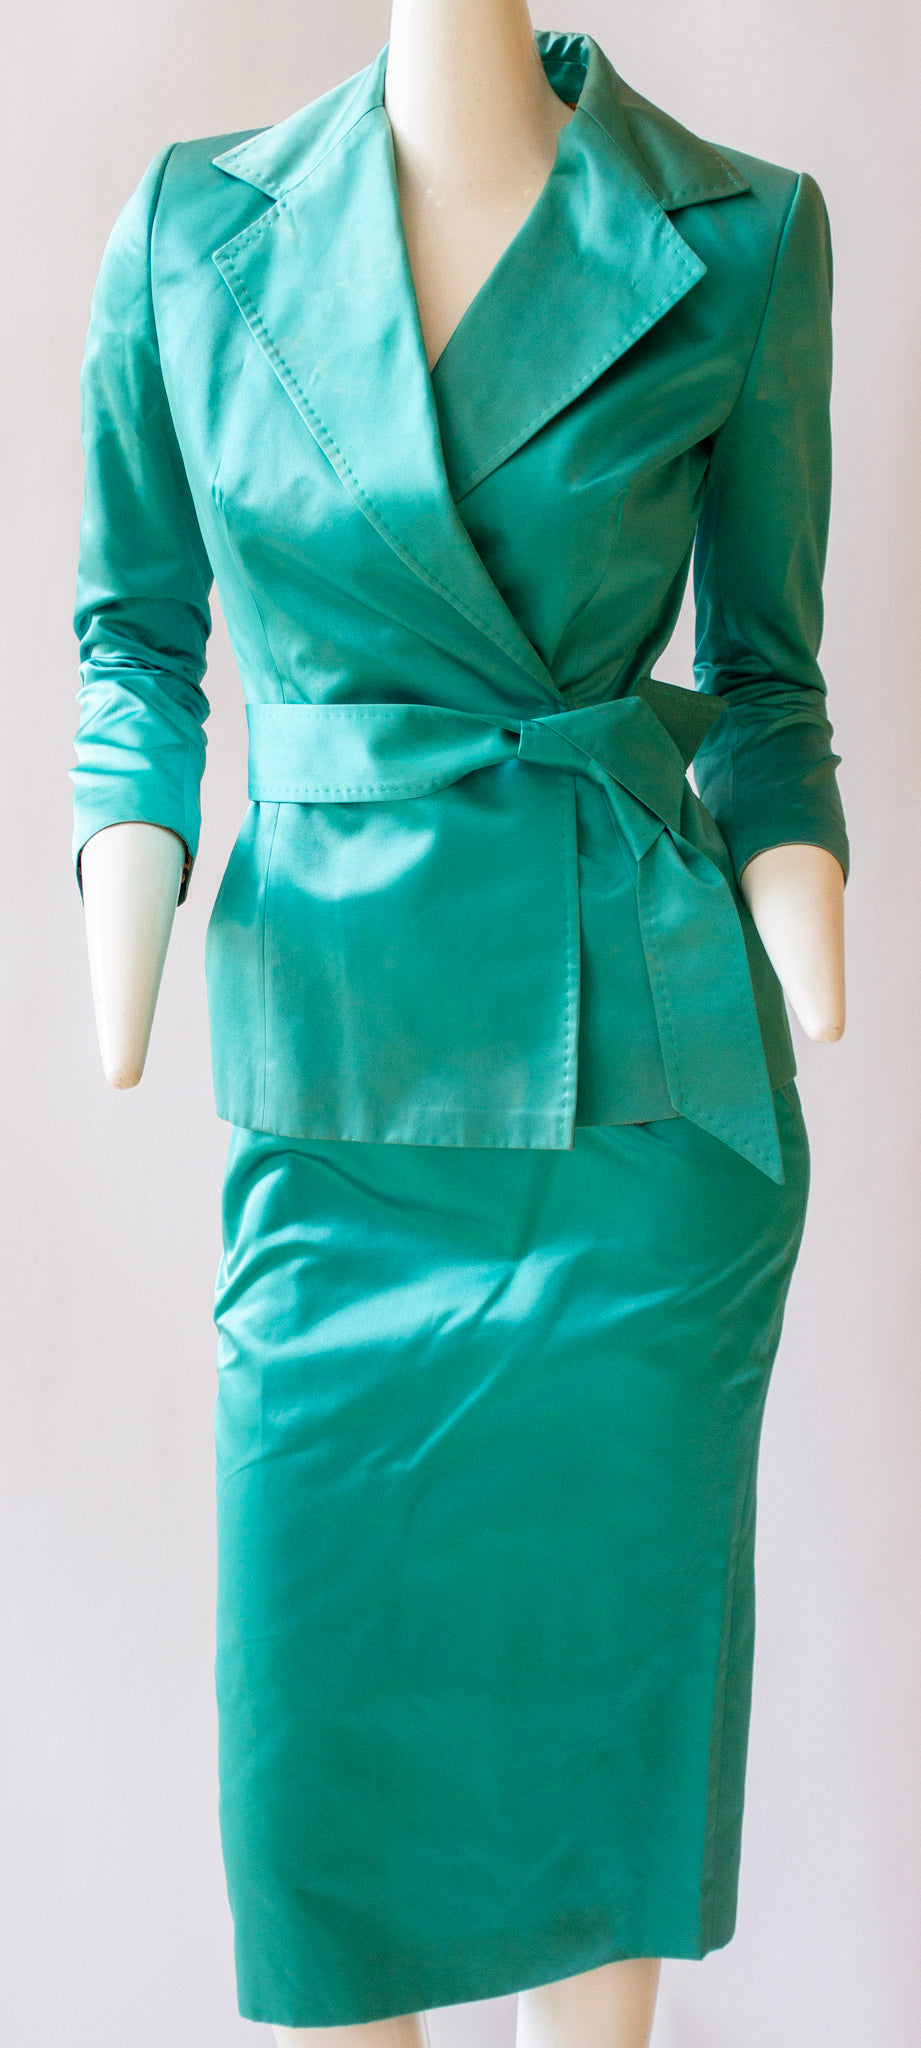 Dolce & Gabbana, two-piece, blue 100% silk, skirt suit owned by Hollywood icon, Terry Moore